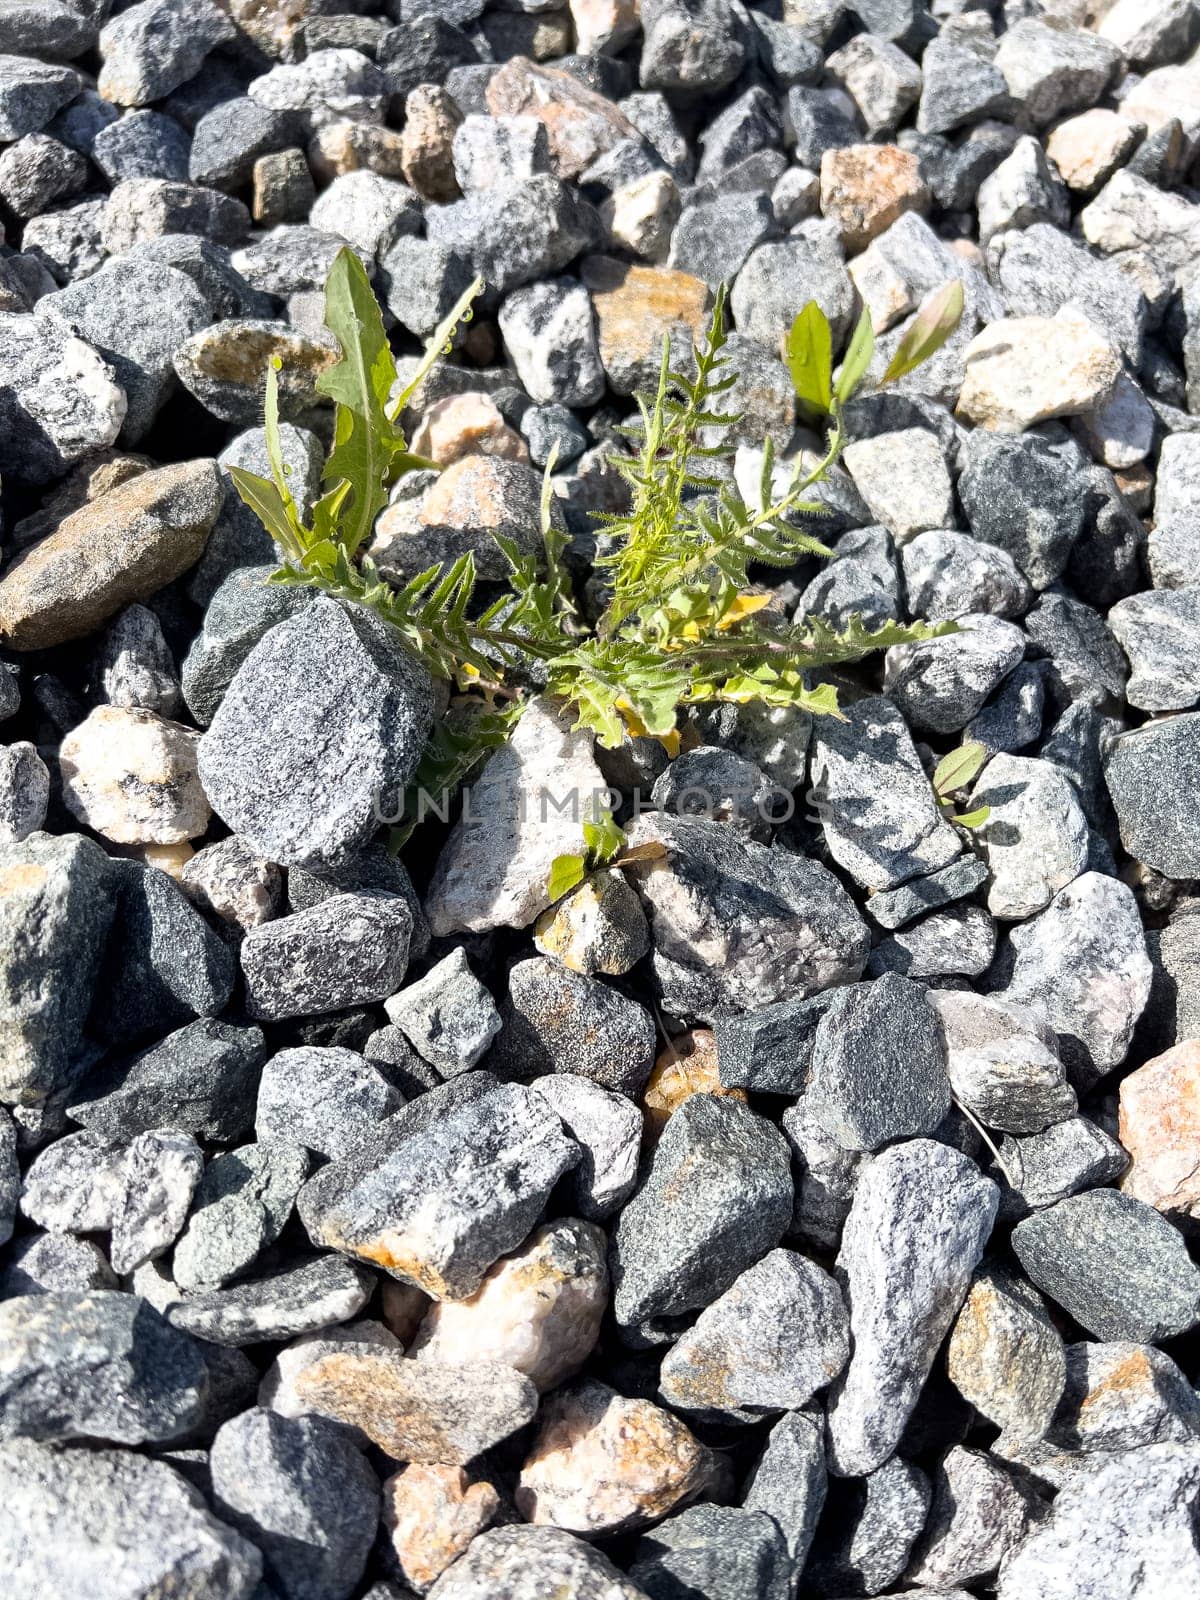 A determined display of nature will, this image shows weeds pushing through a rugged landscape of mixed gravel, contrasting the softness of organic life with the hardness of stone.